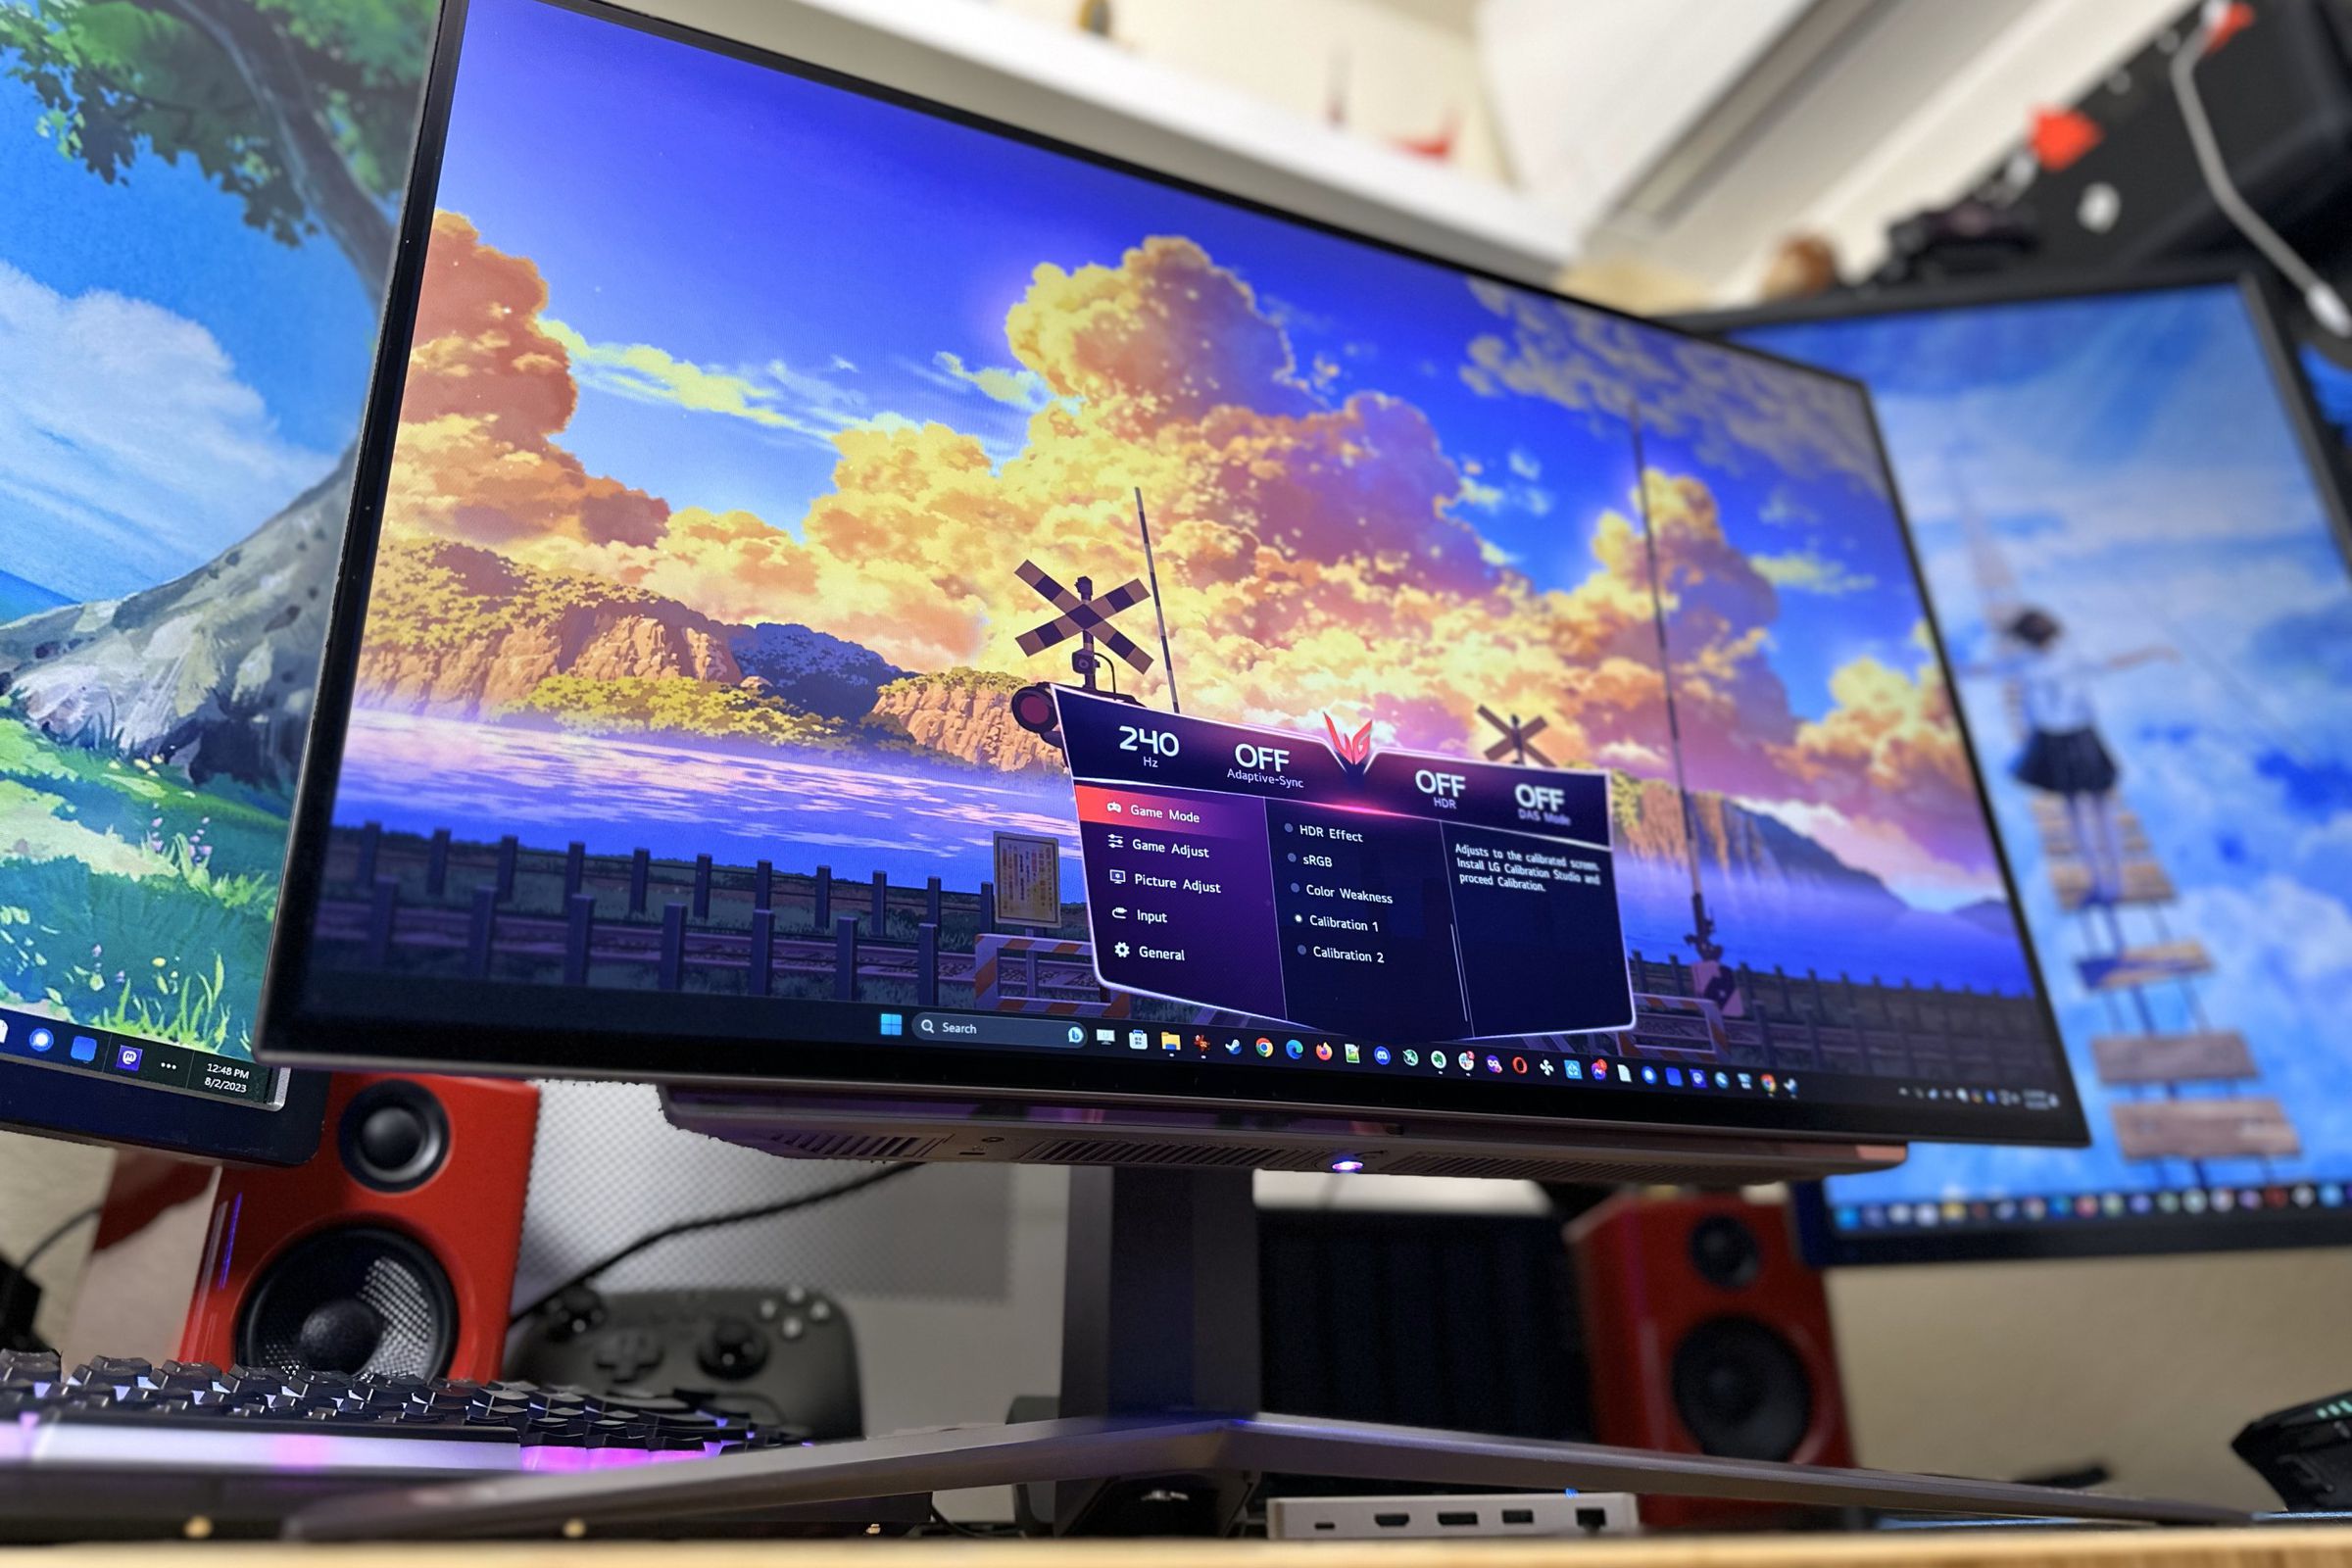 A bright, colorful OLED monitor with a big V-shaped stand underneath, flanked by two other monitors in portrait mode. The main monitor has a colorful sky on screen with big orange sunset-lit clouds and an on-screen display showing it’s running at 240Hz.